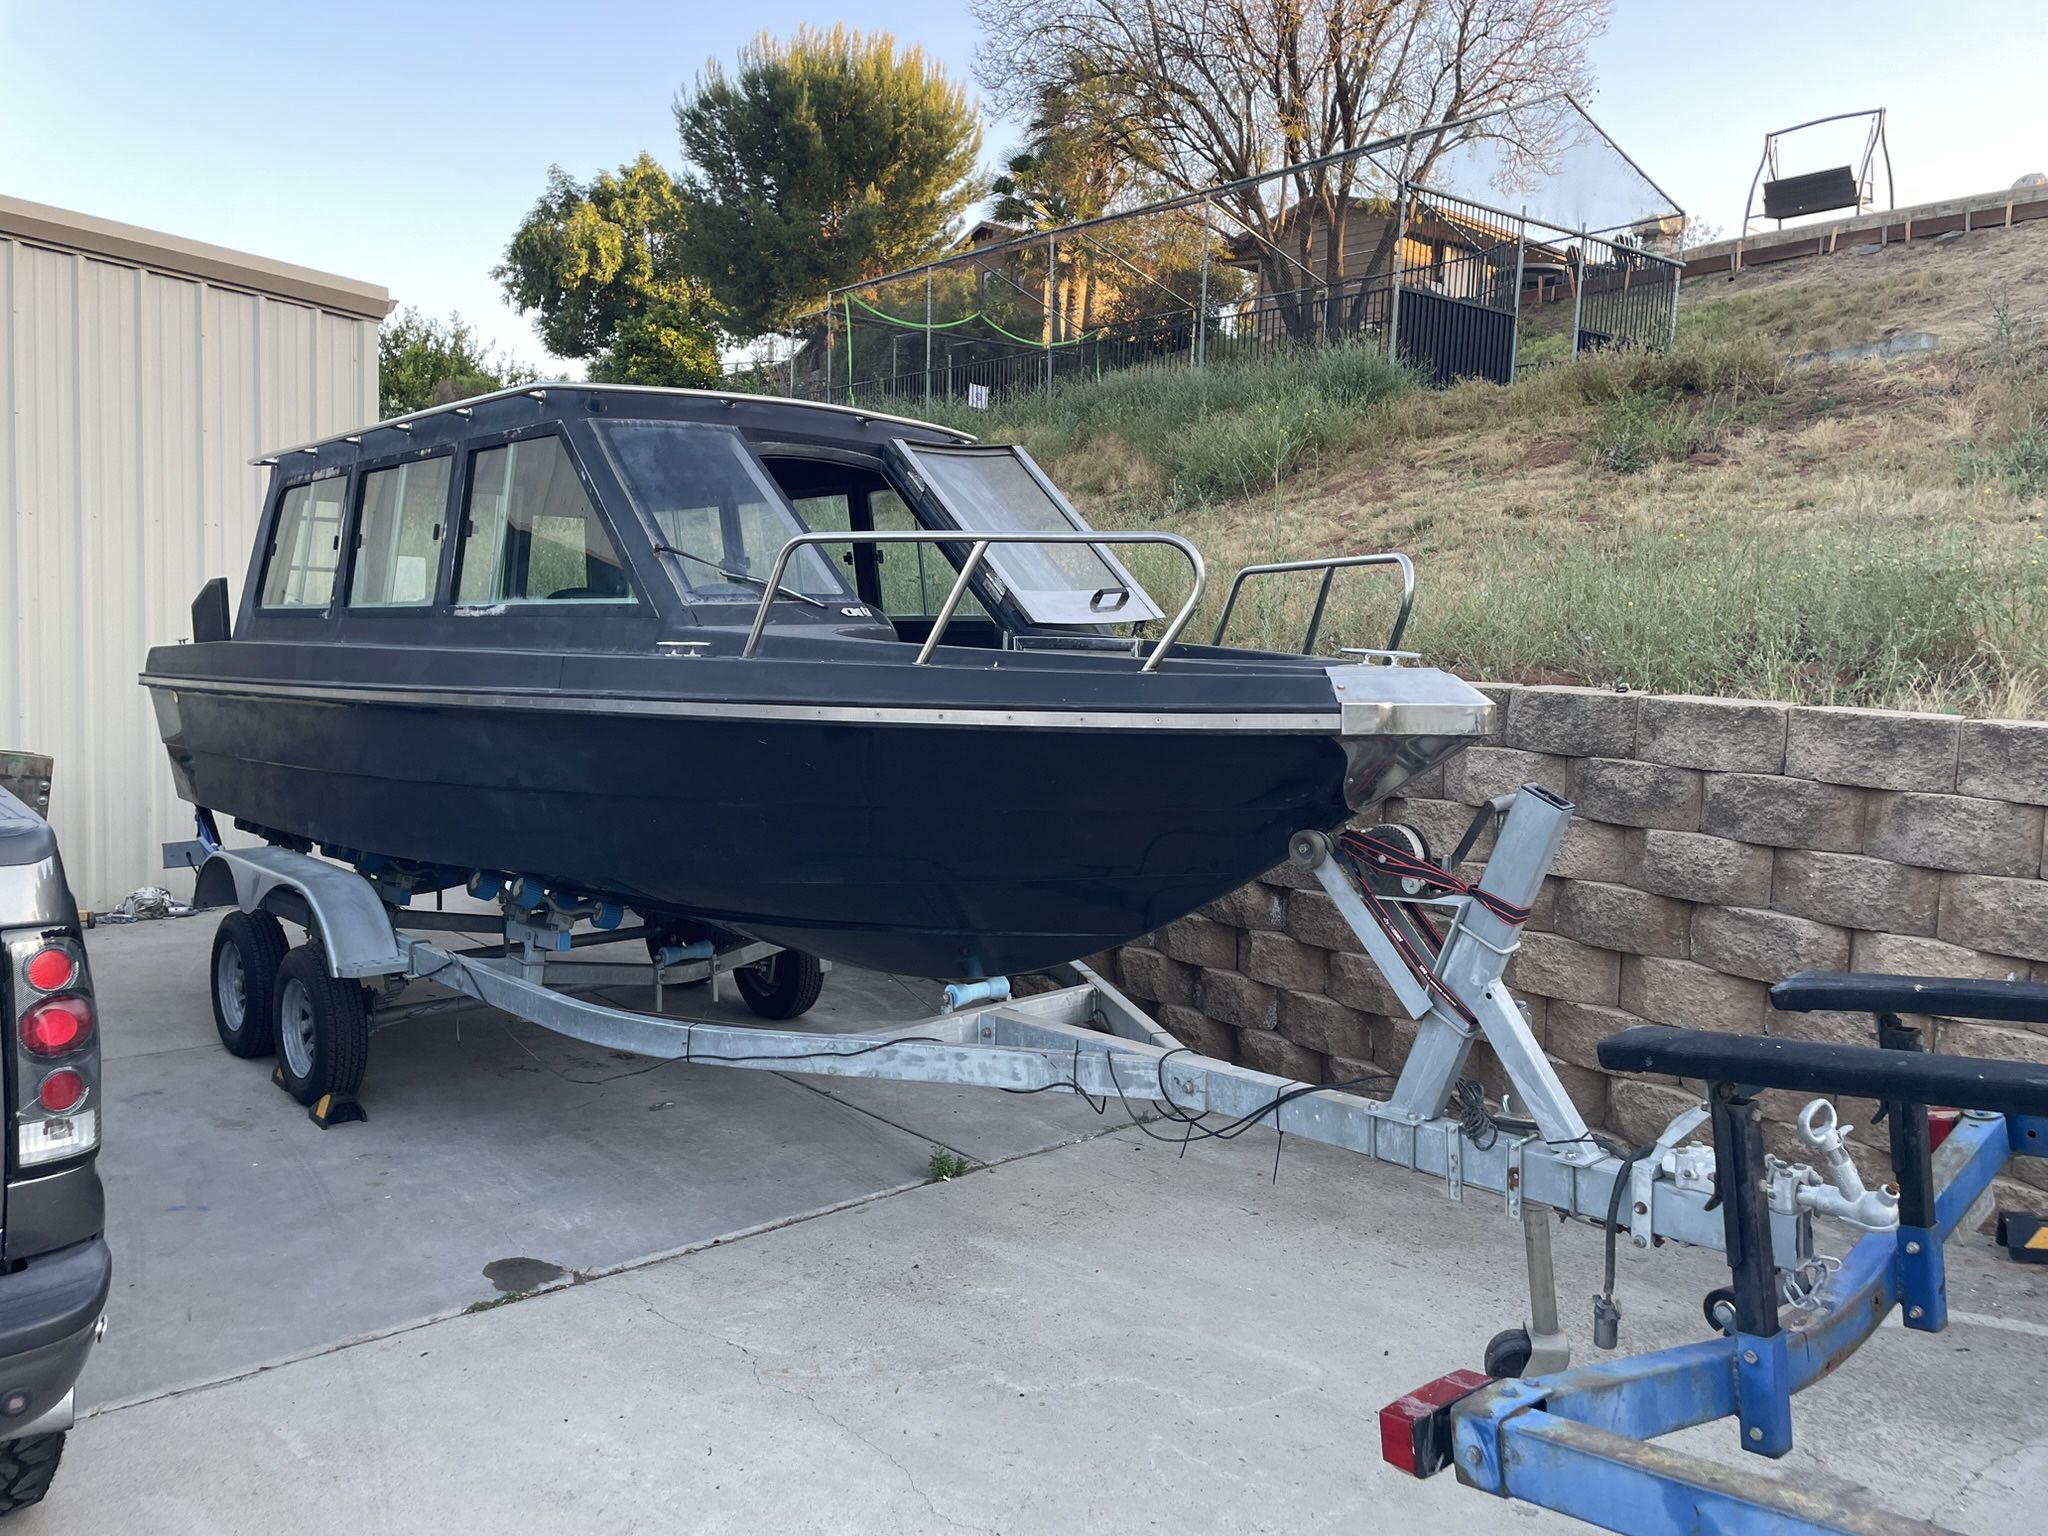 2019 22’ Boat And  2019 Trailer Never In Water Needs Finishing 